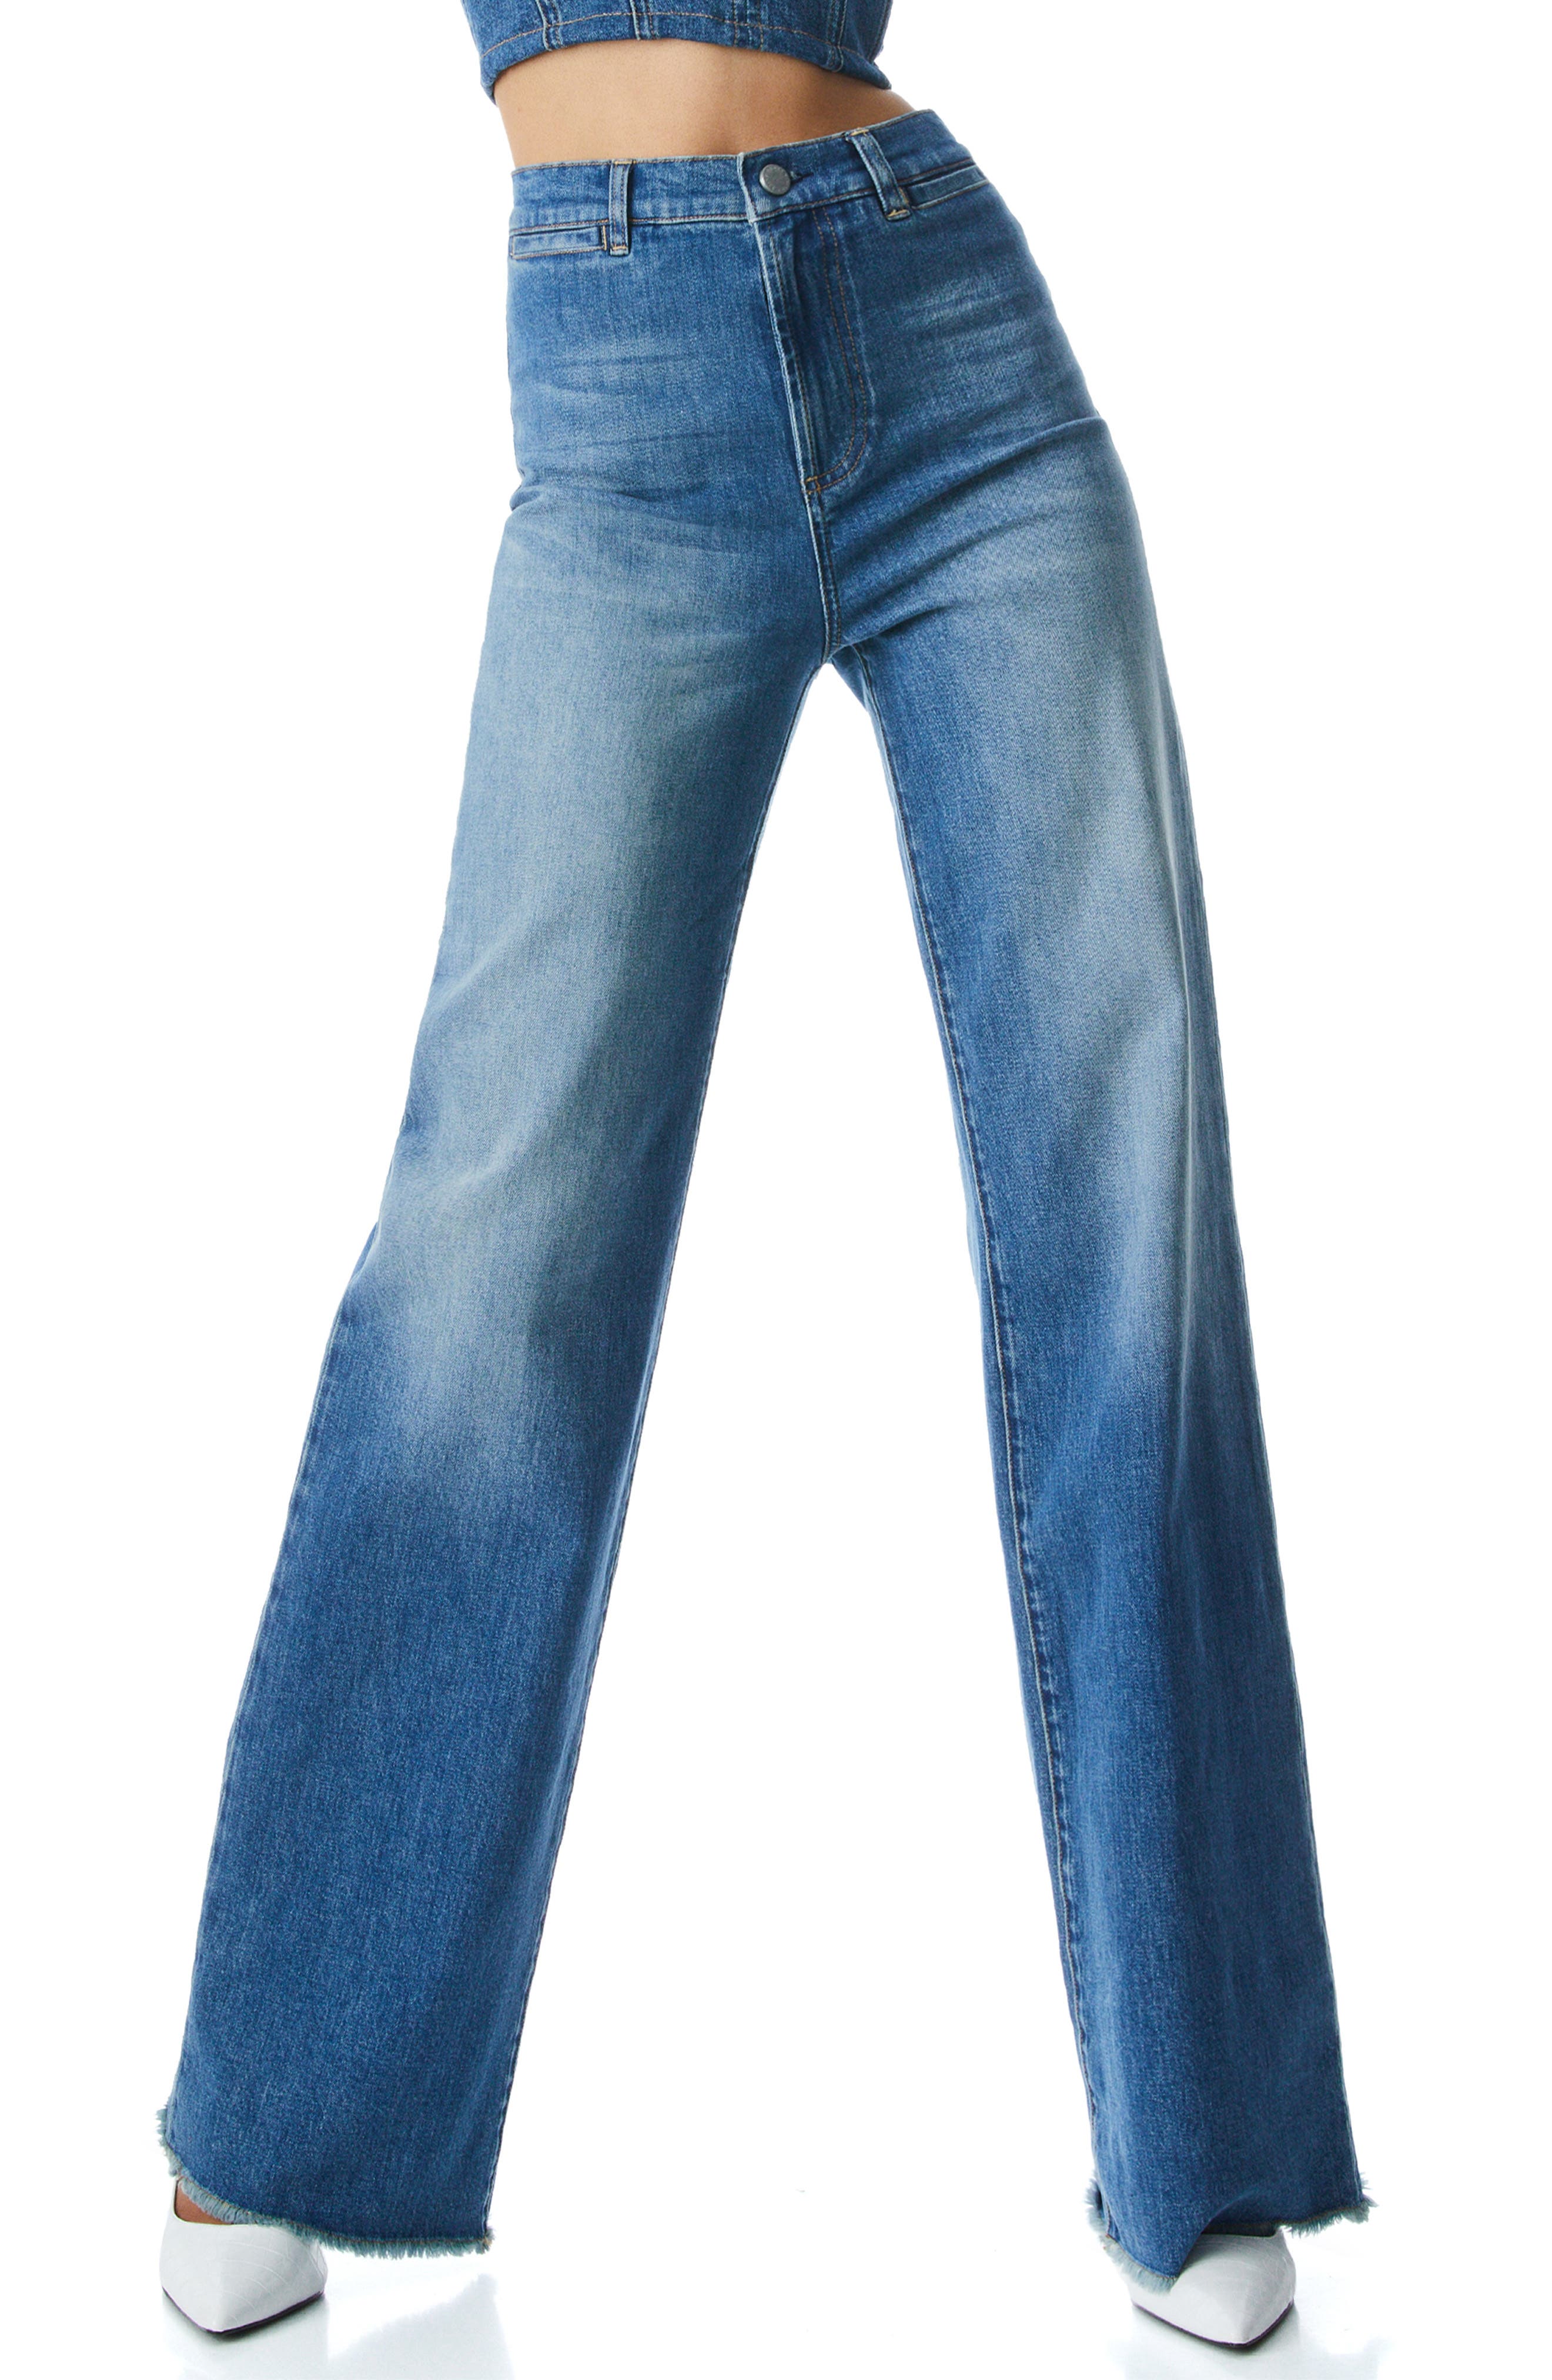 Alice + Olivia Gorgeous Coin Pocket Flare Jeans in Best Intentions at Nordstrom